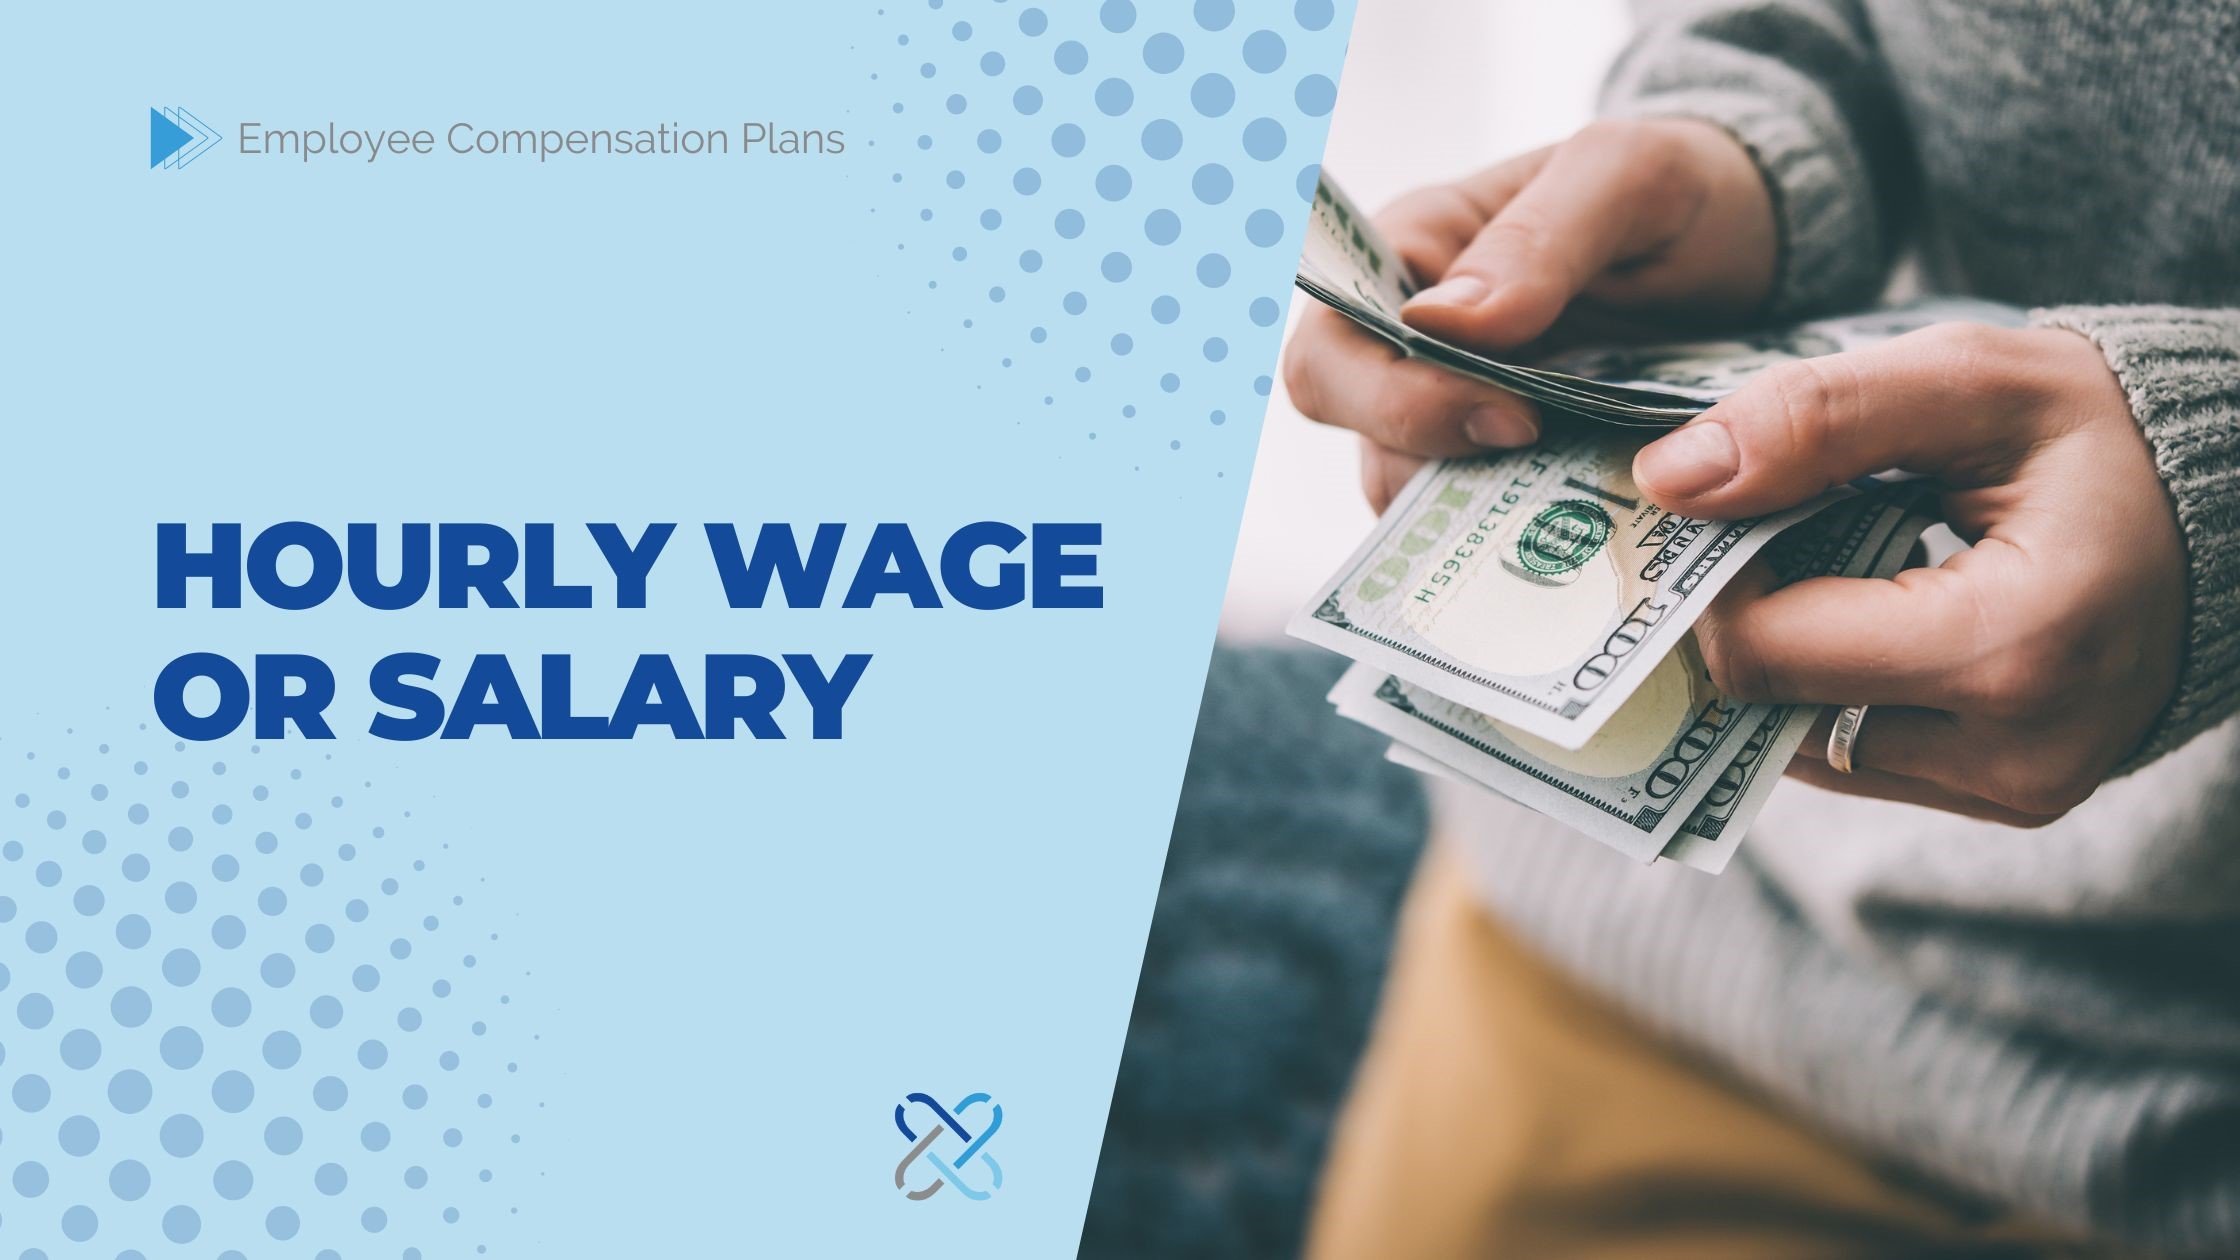 Employee Compensation Plans: The 5 Main Components - Solutions For Payroll